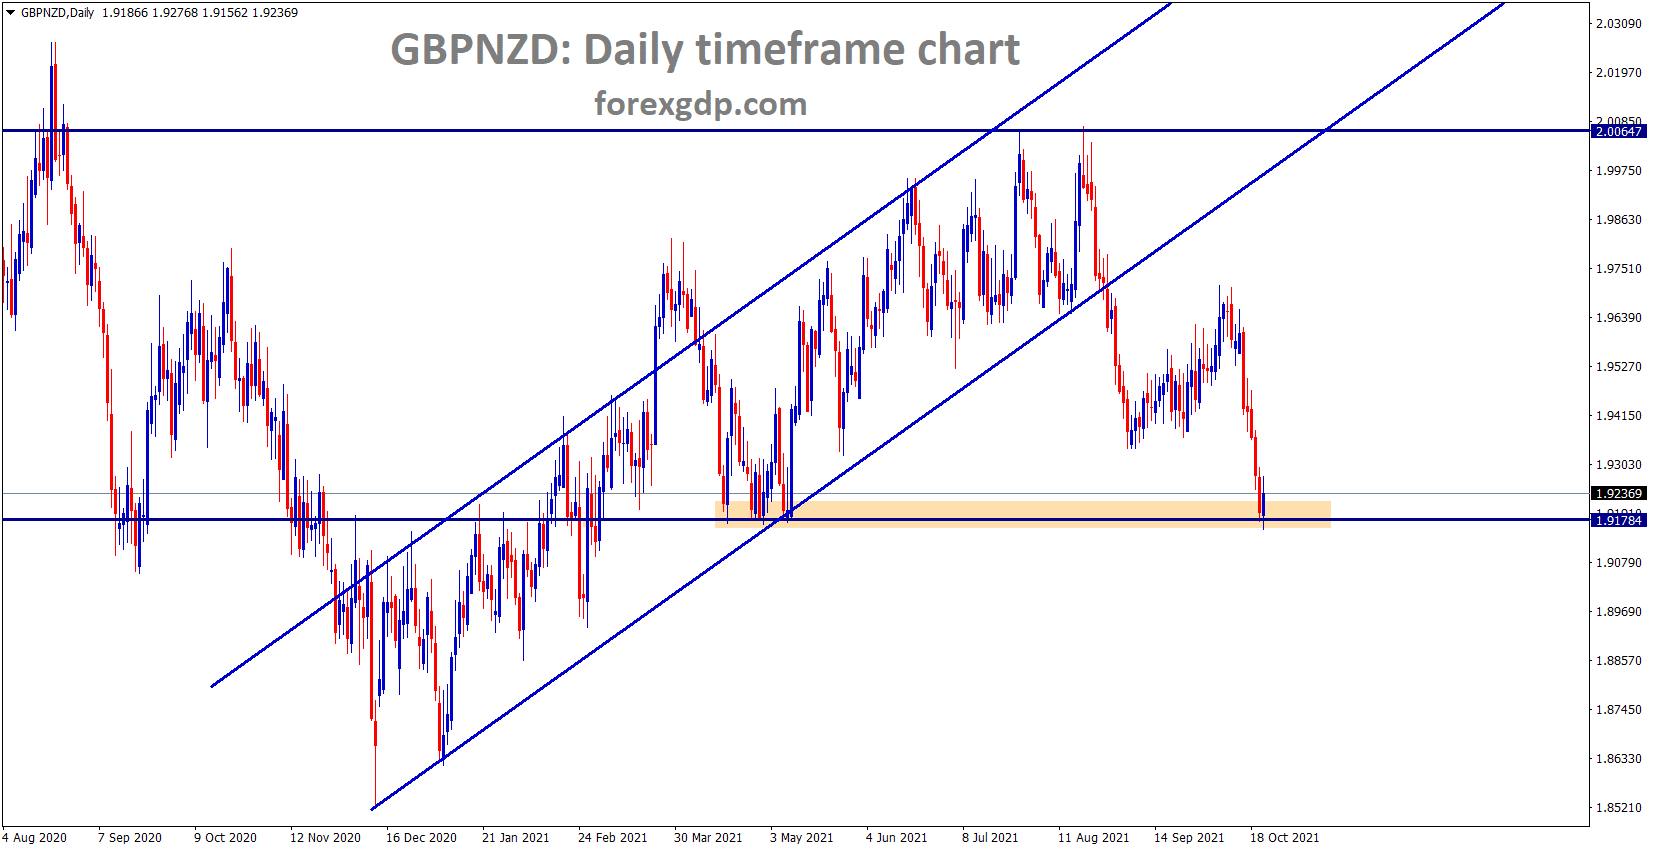 GBPNZD is bouncing back after hitting the horizontal support area